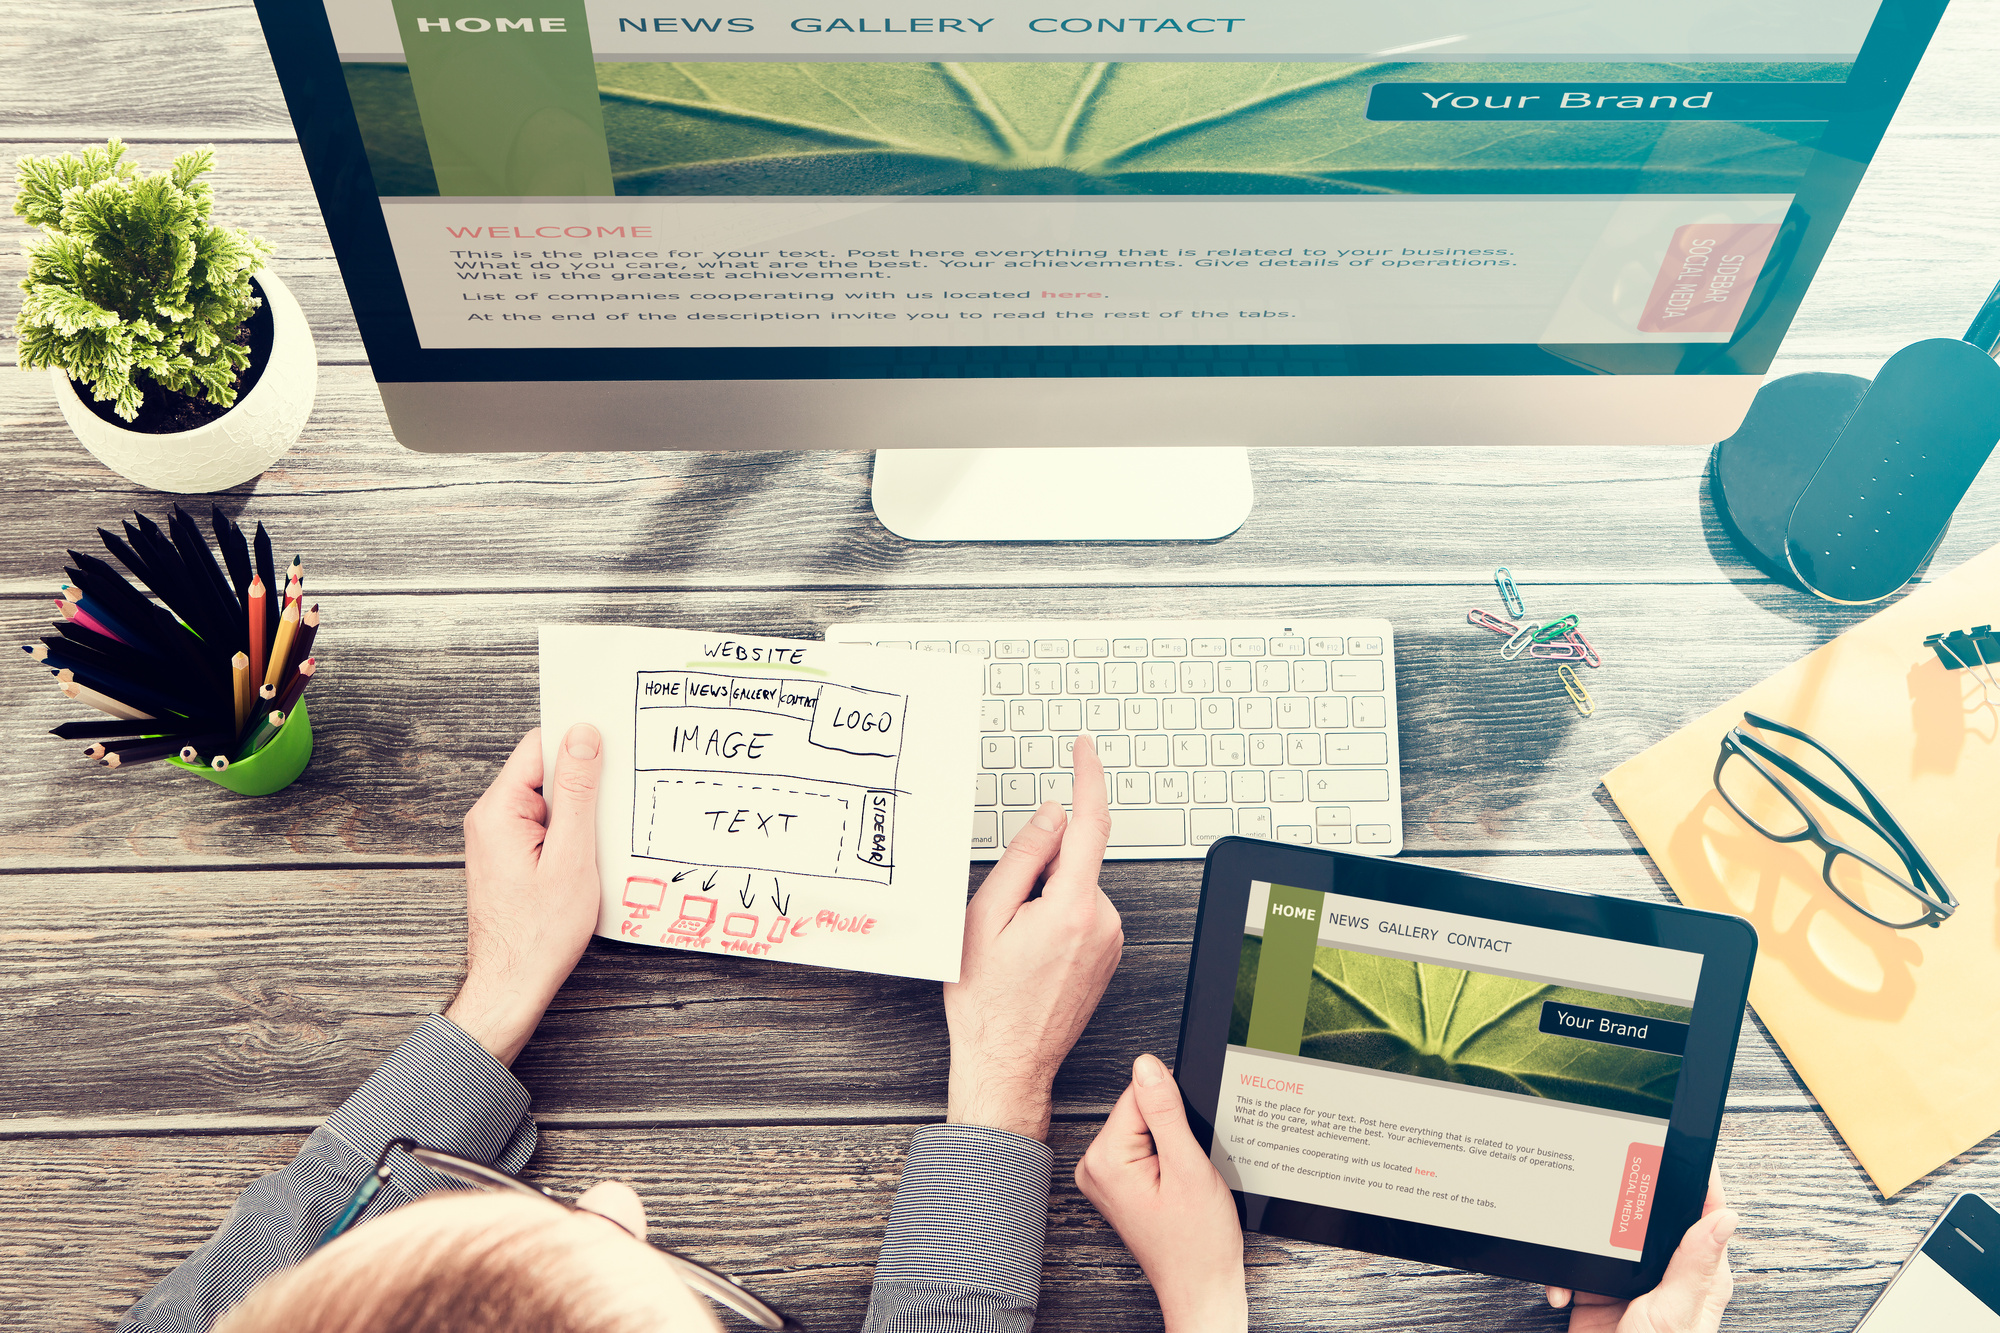 3 Uses for a Landing Page and How to Build One That Converts